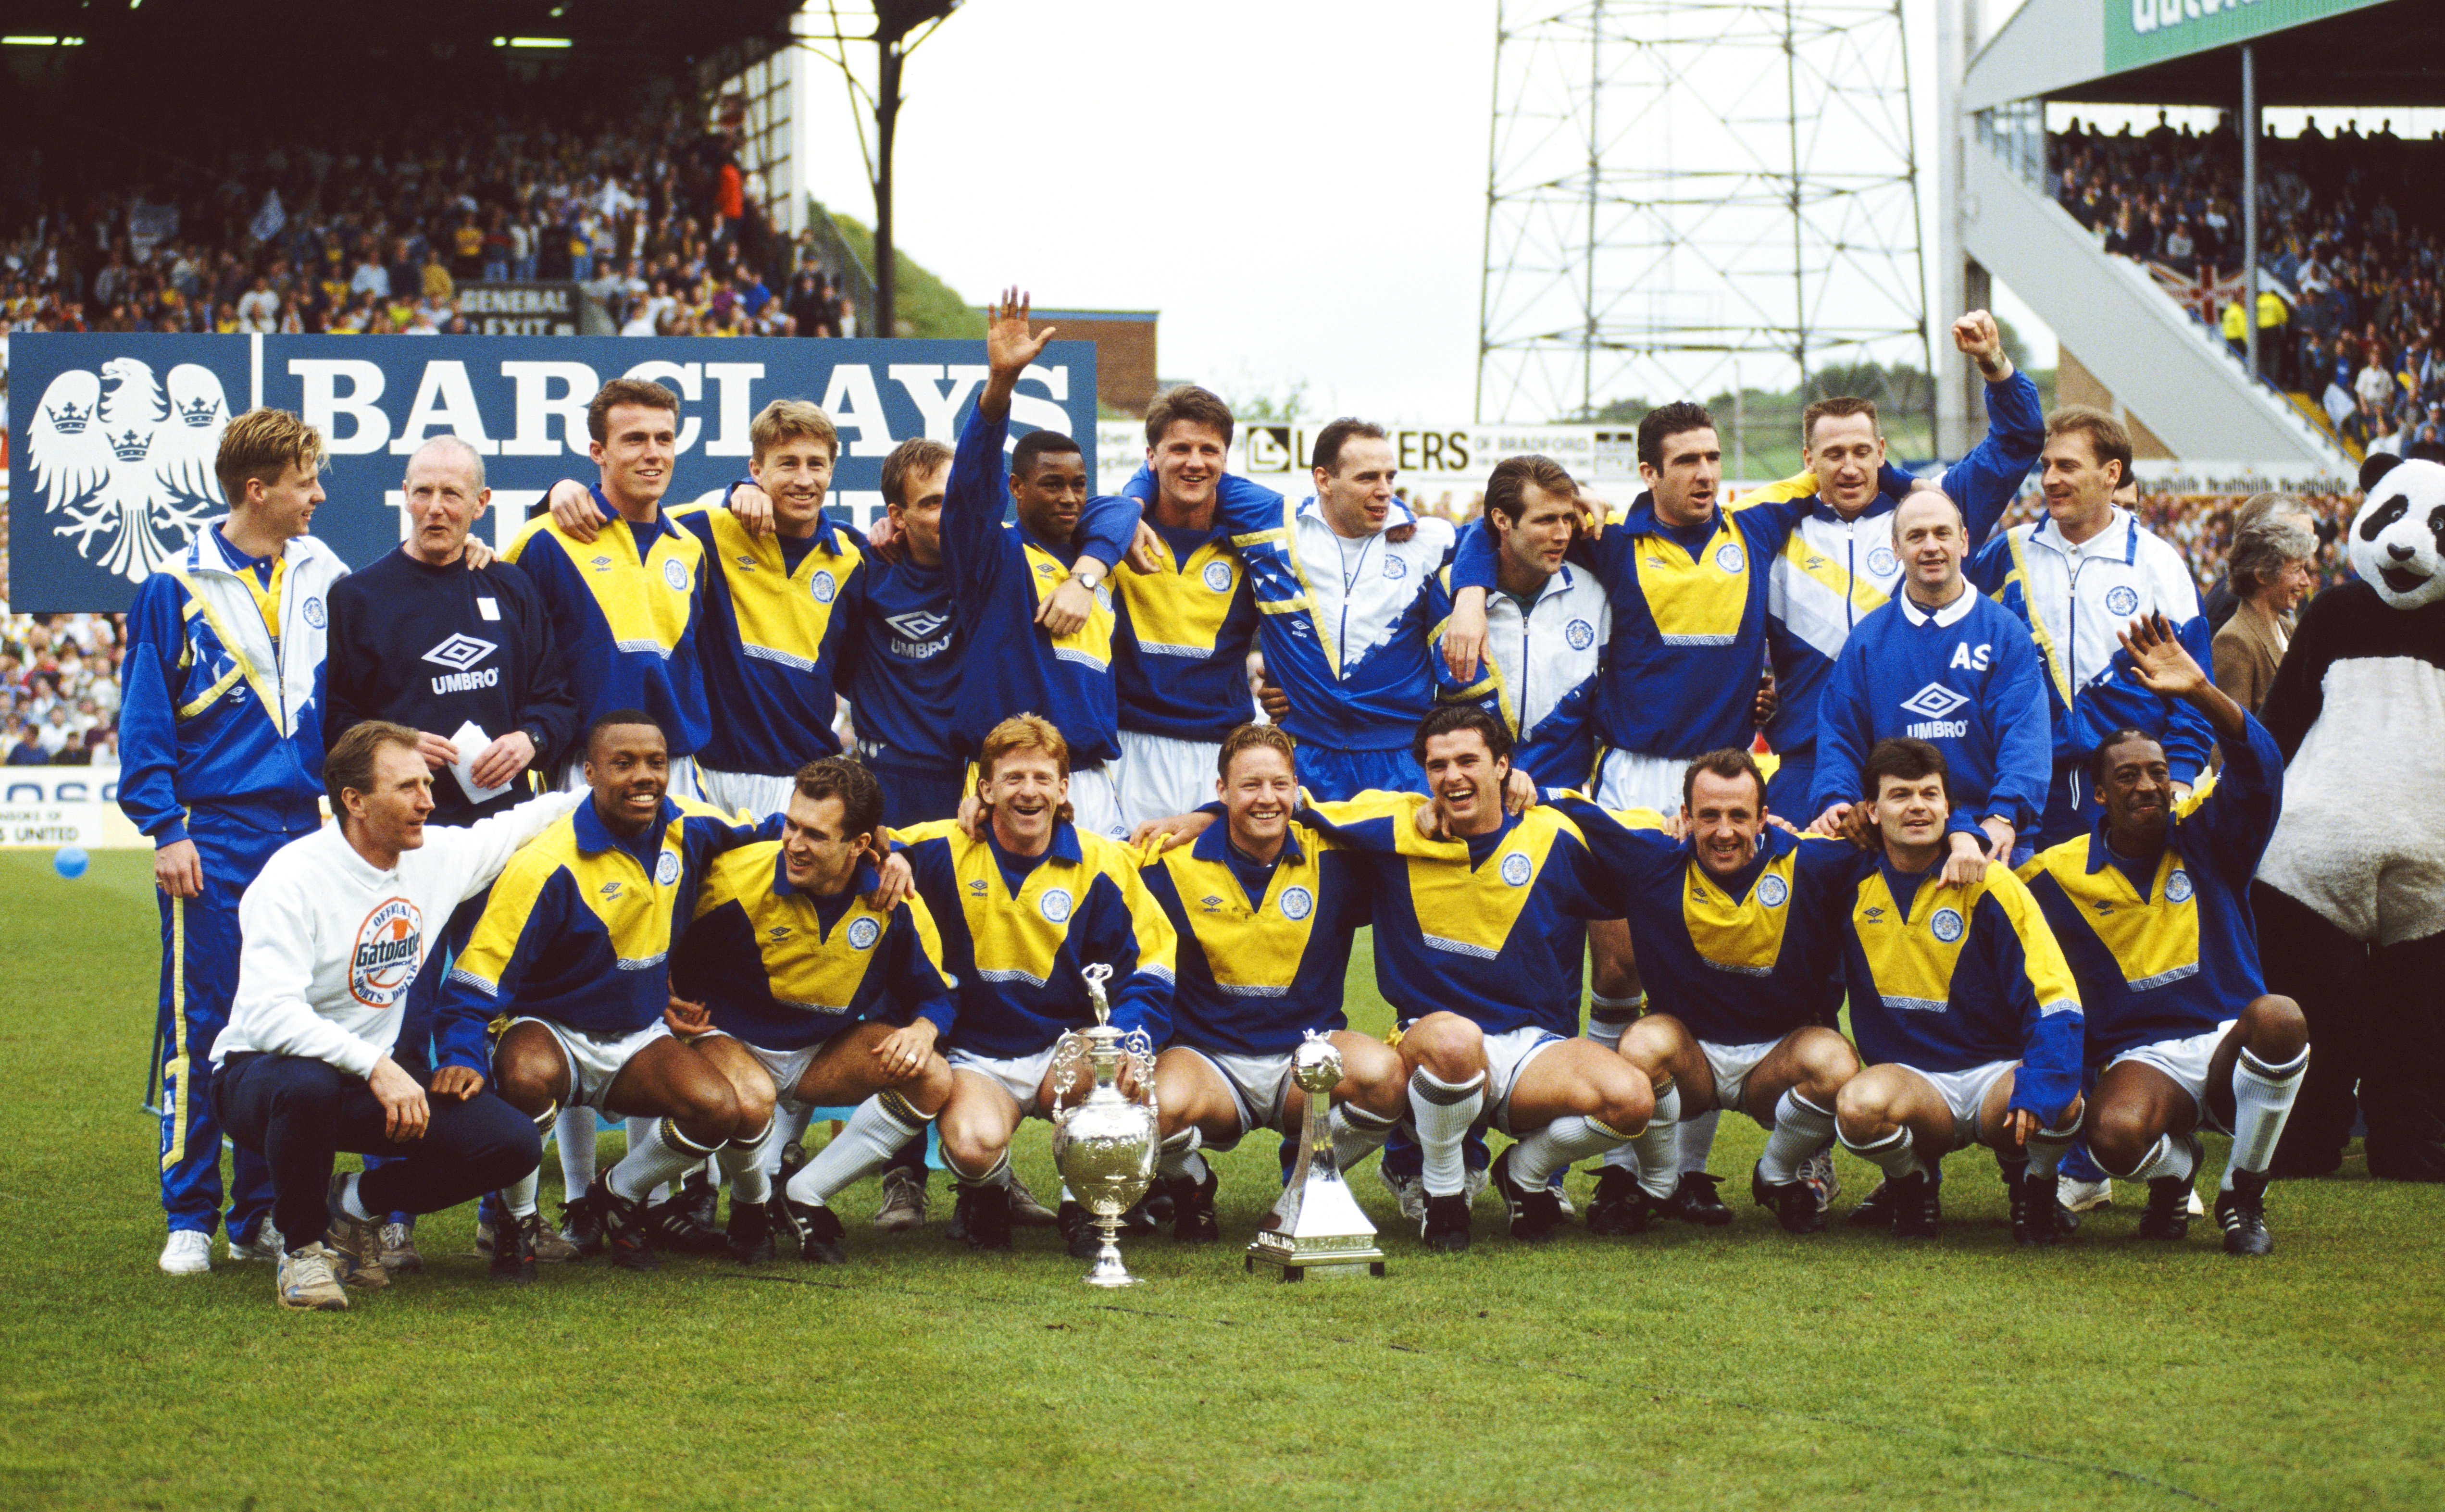 leeds-united-division-one-champions-1991-92.jpg